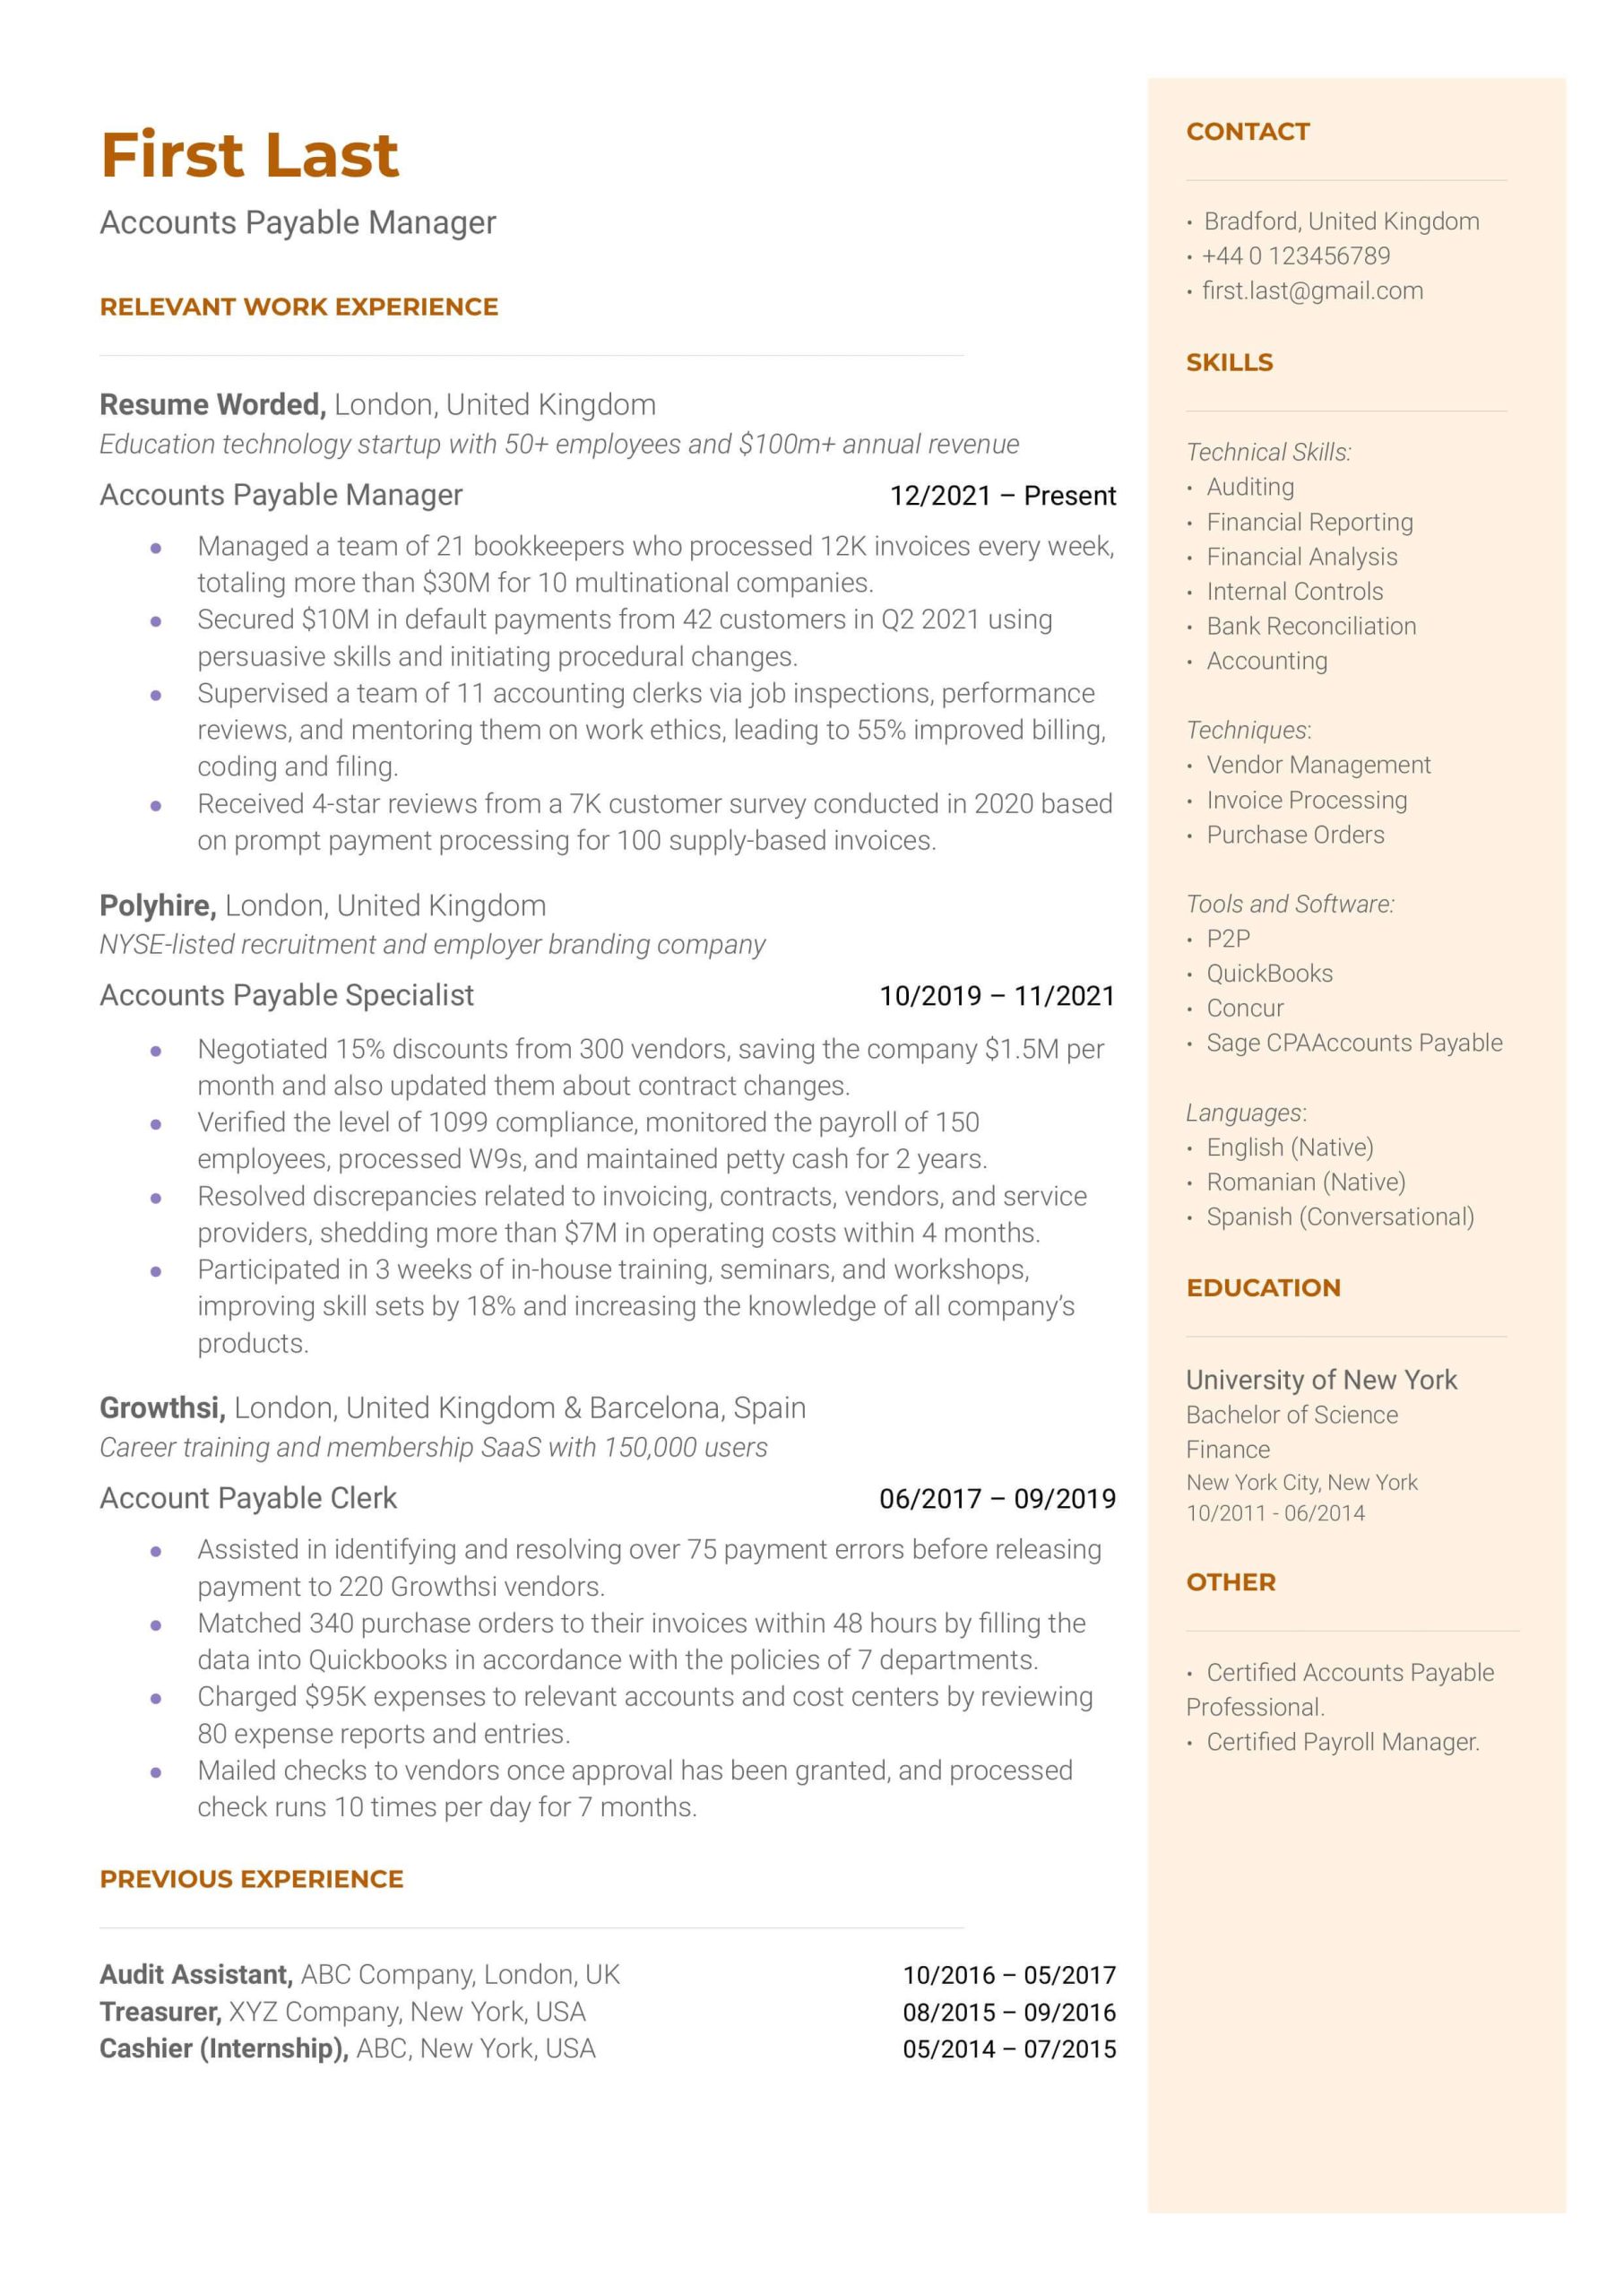 Sample Resume for Broadband Field Technician 13 Account Manager Resume Examples for 2022 Resume Worded